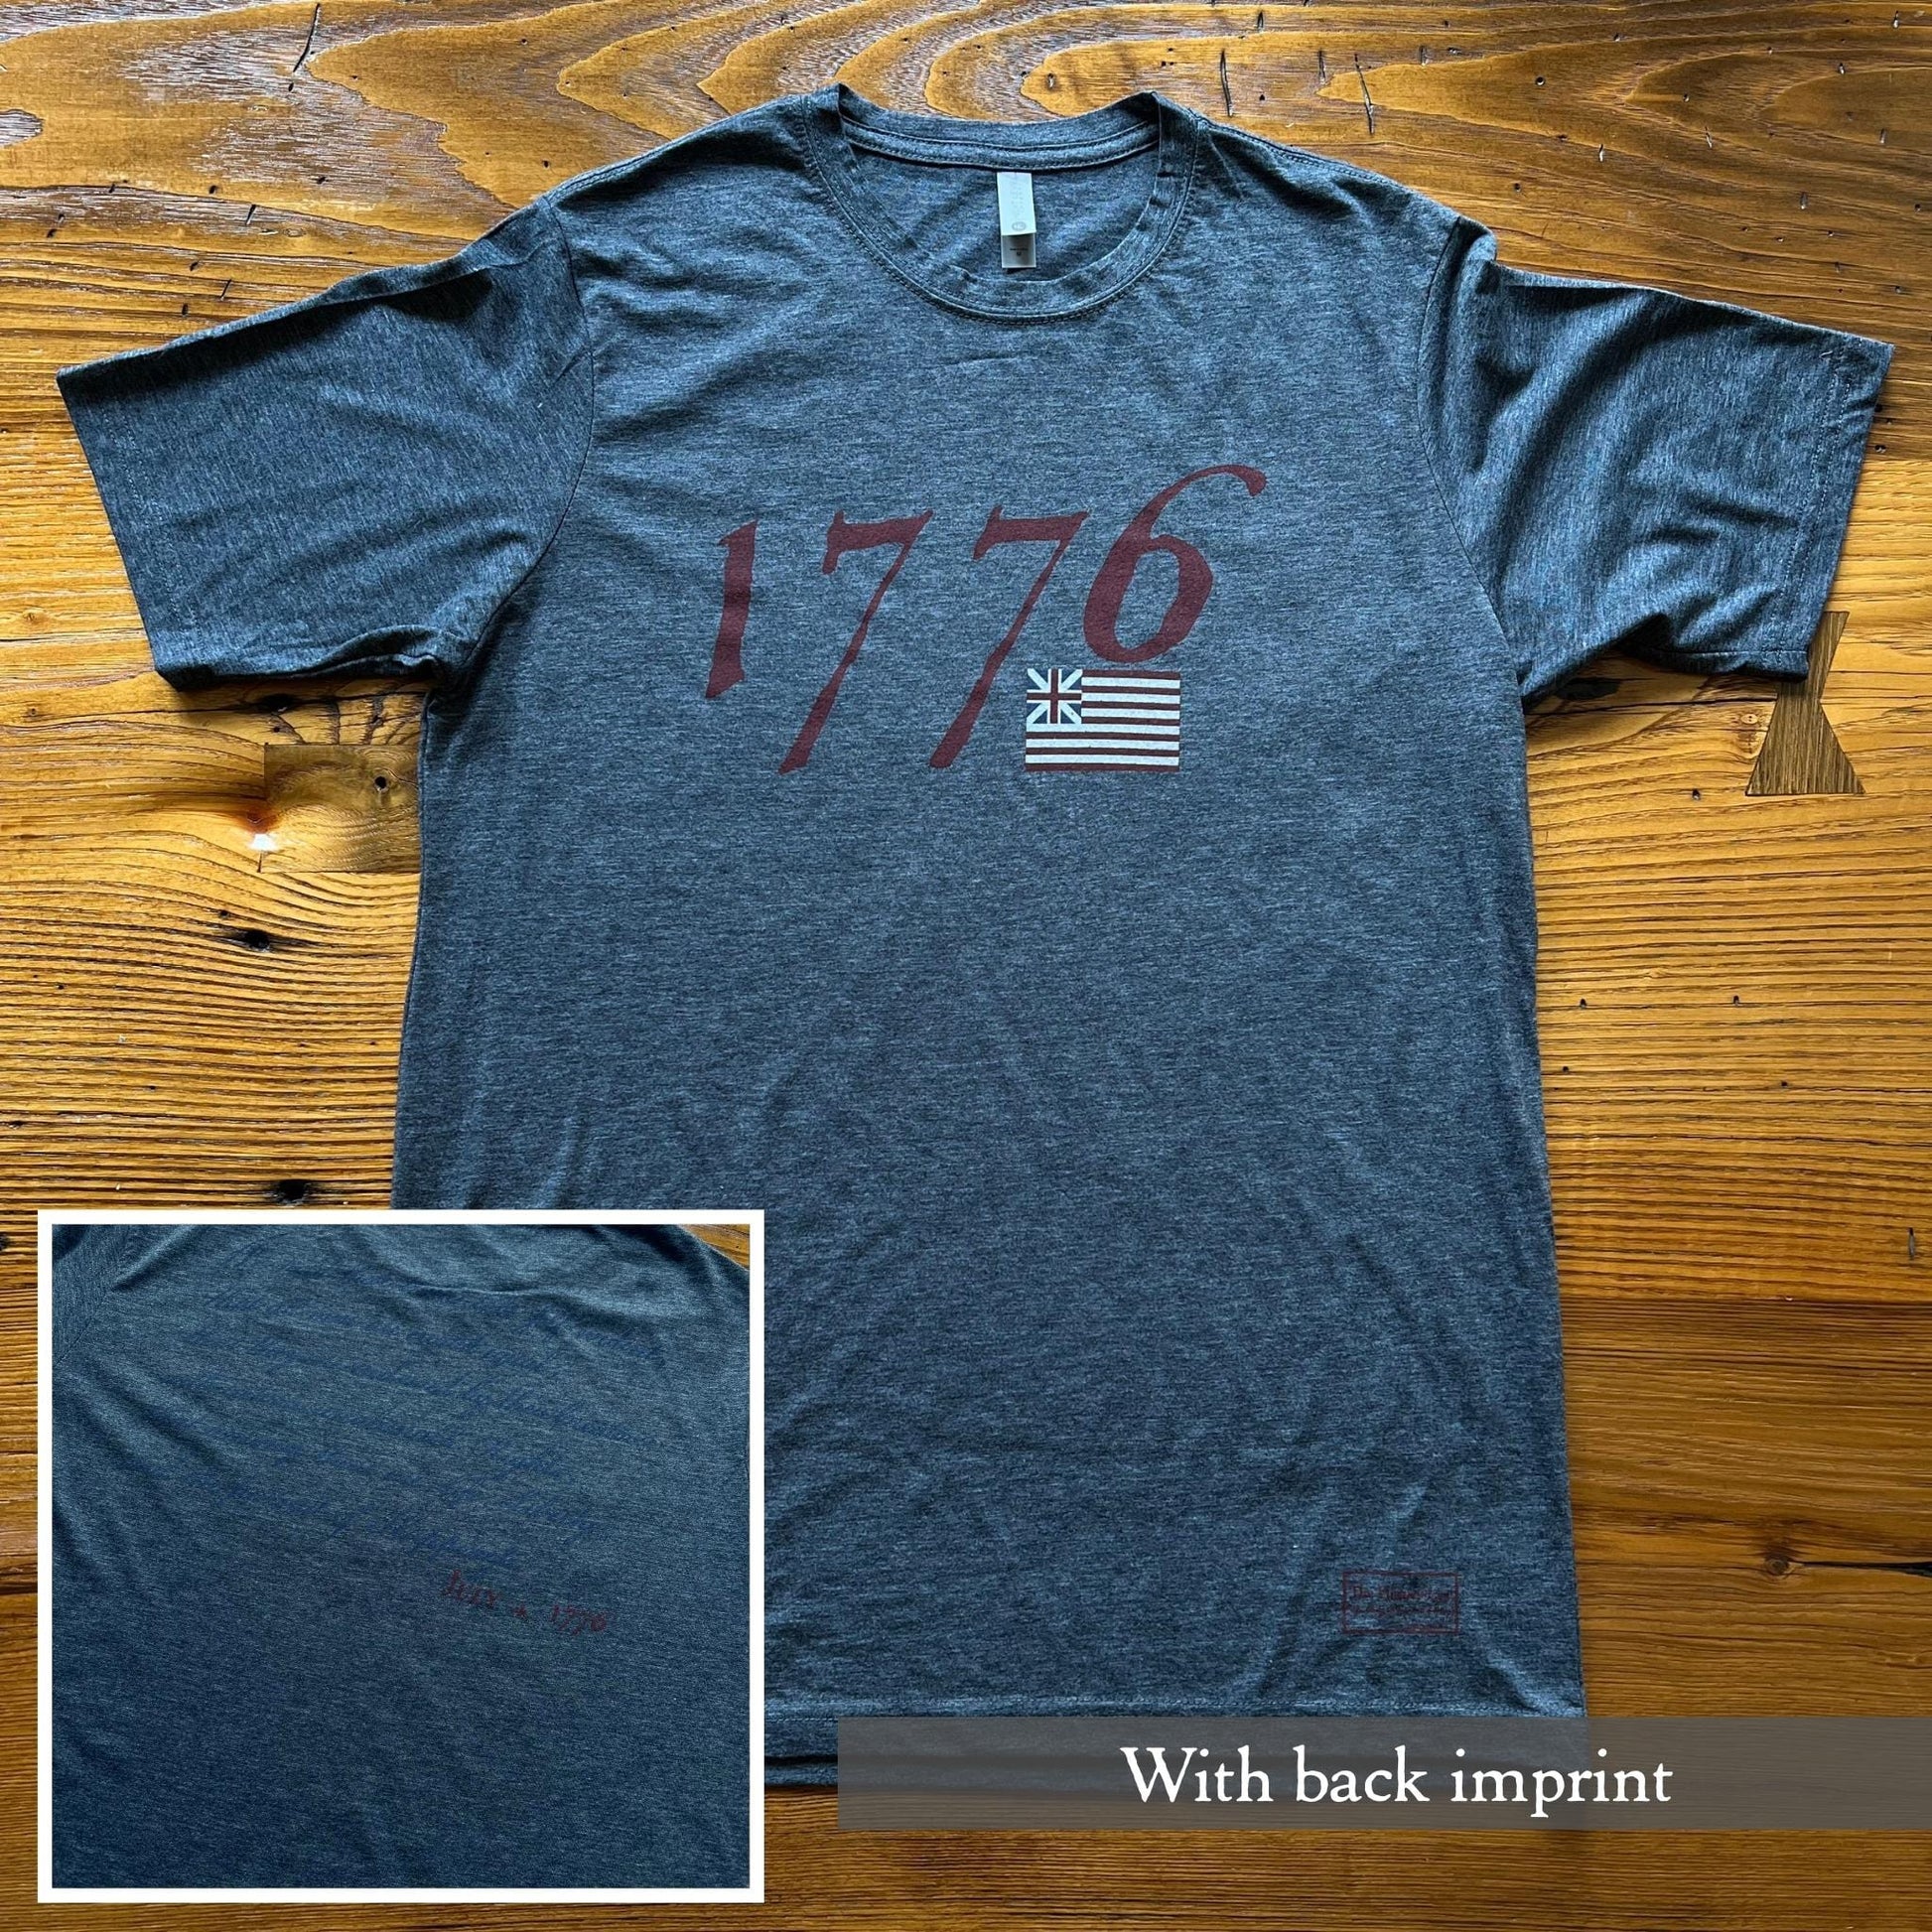 "1776 with Our Nation's First Flag" Shirt - Antique denim from The History List store with back imprint